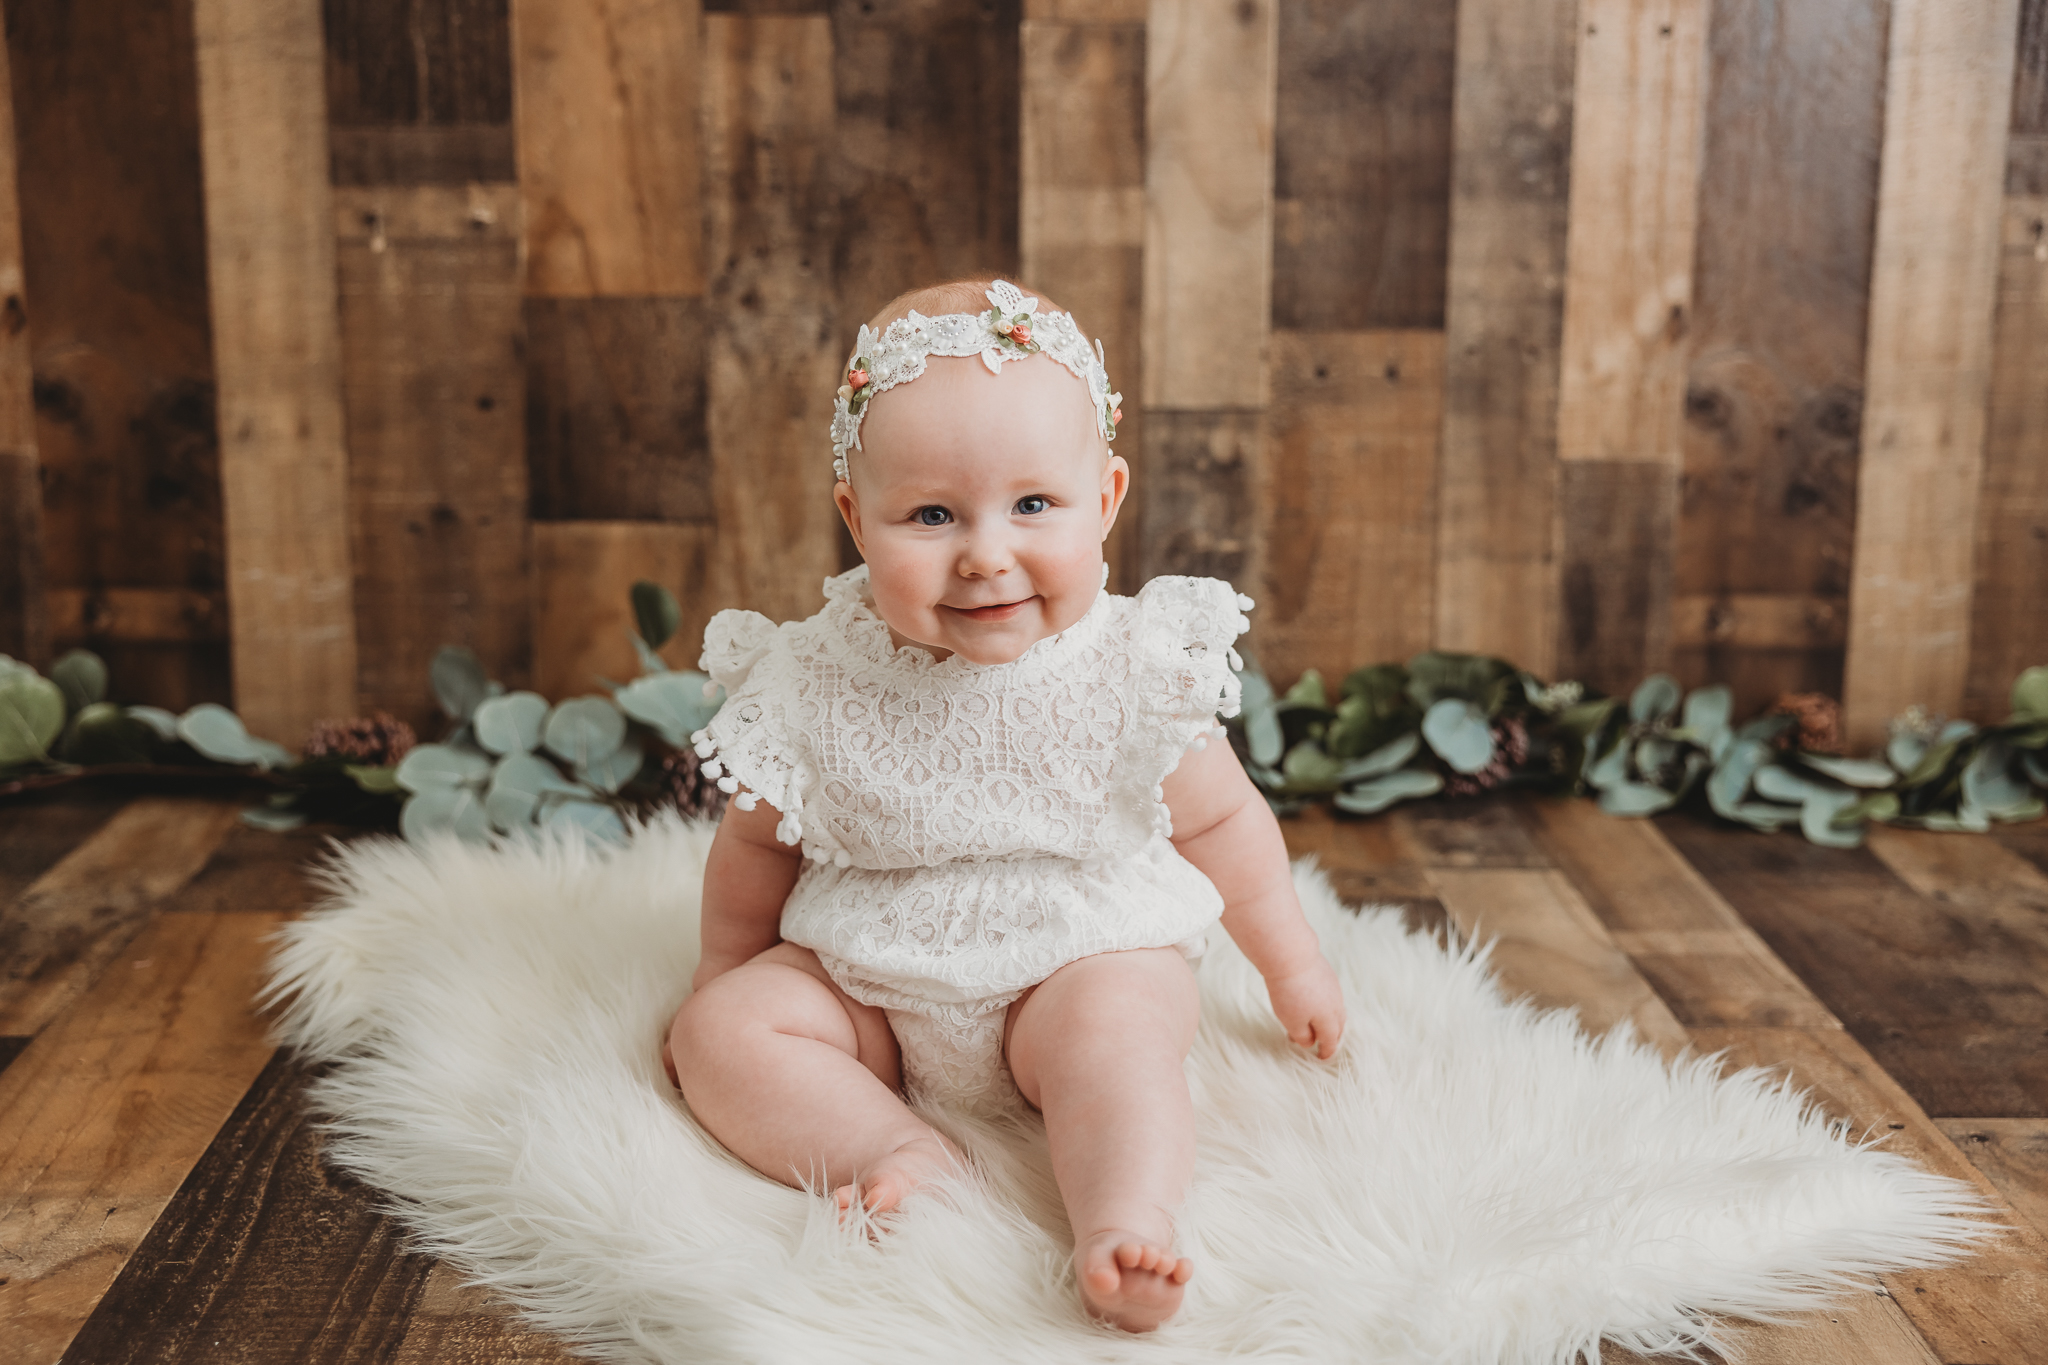 smiling baby sitting on fur with greens and a wooden background, sitter session